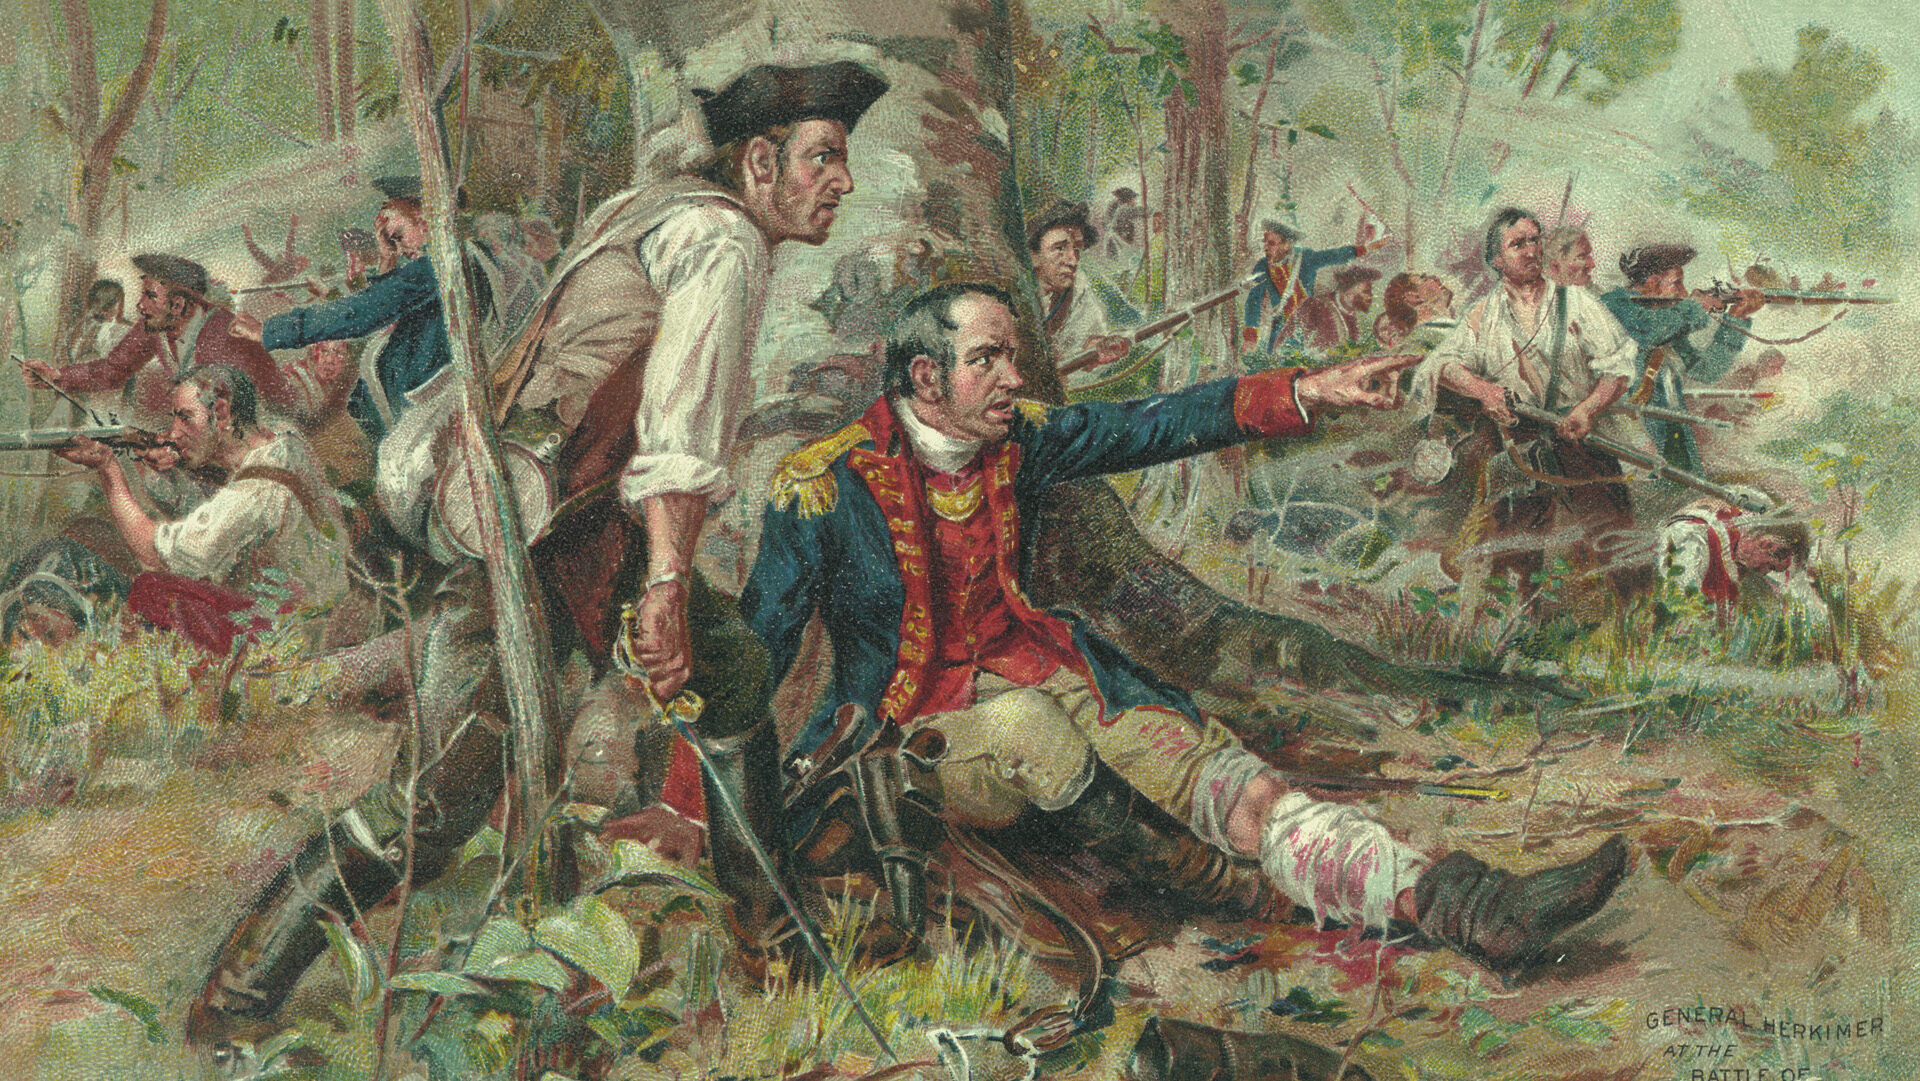 Determined to defend the Mohawk Valley, patriots under General Nicholas Herkimer fight back at Indians and Tories ambushing them in the wilderness. The wounded Herkimer commanded from under a tree as the battle raged hour after hour.